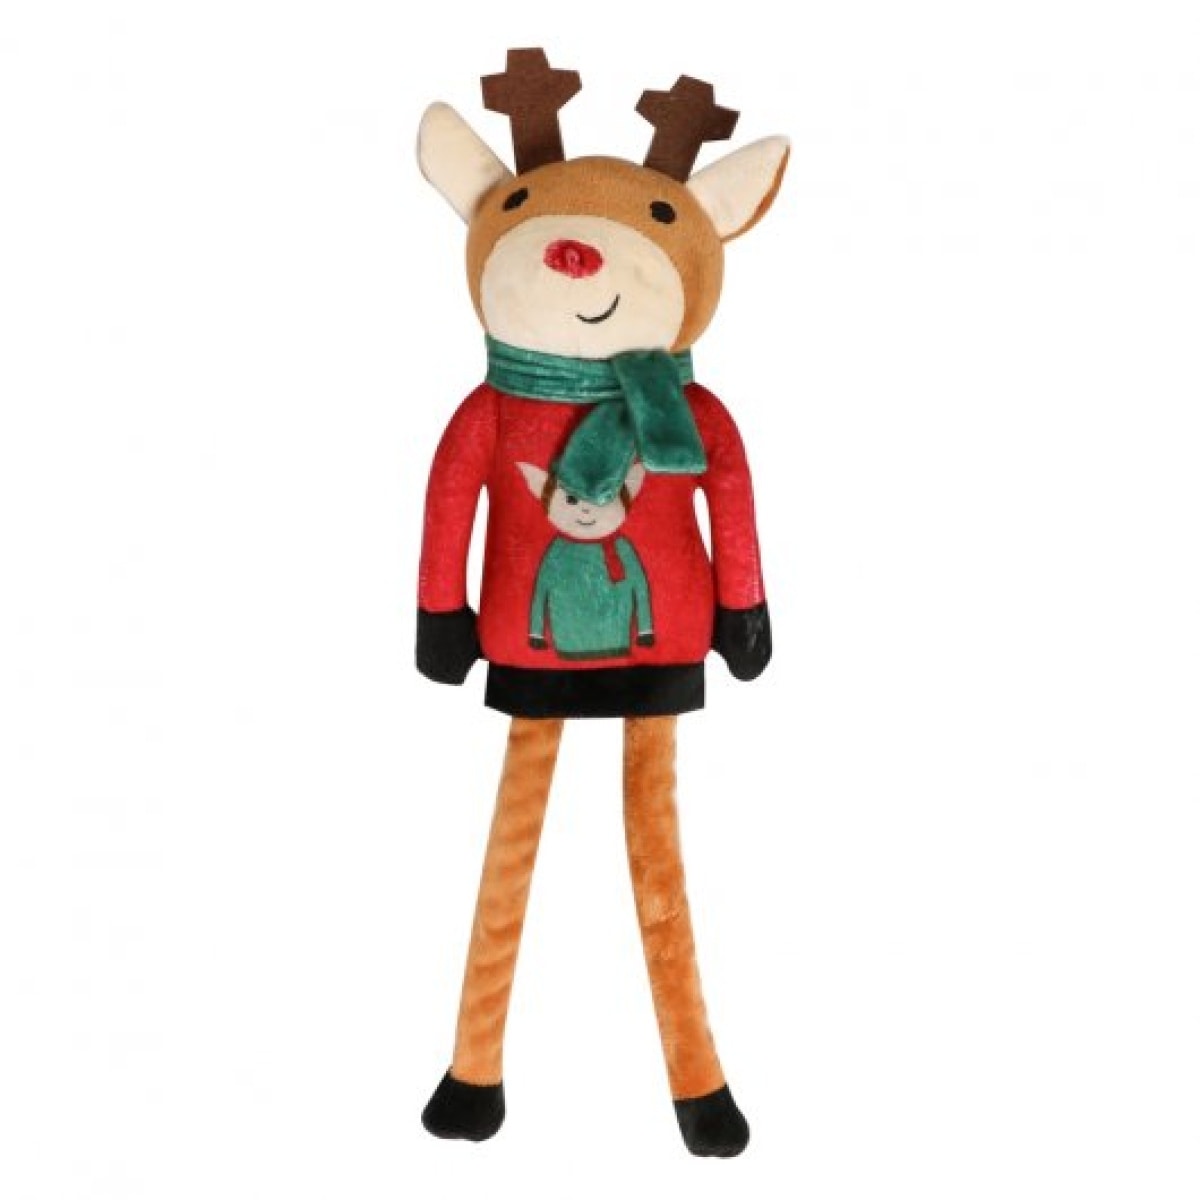 Festive Reindeer Plush Toy With Rope Legs Main Image